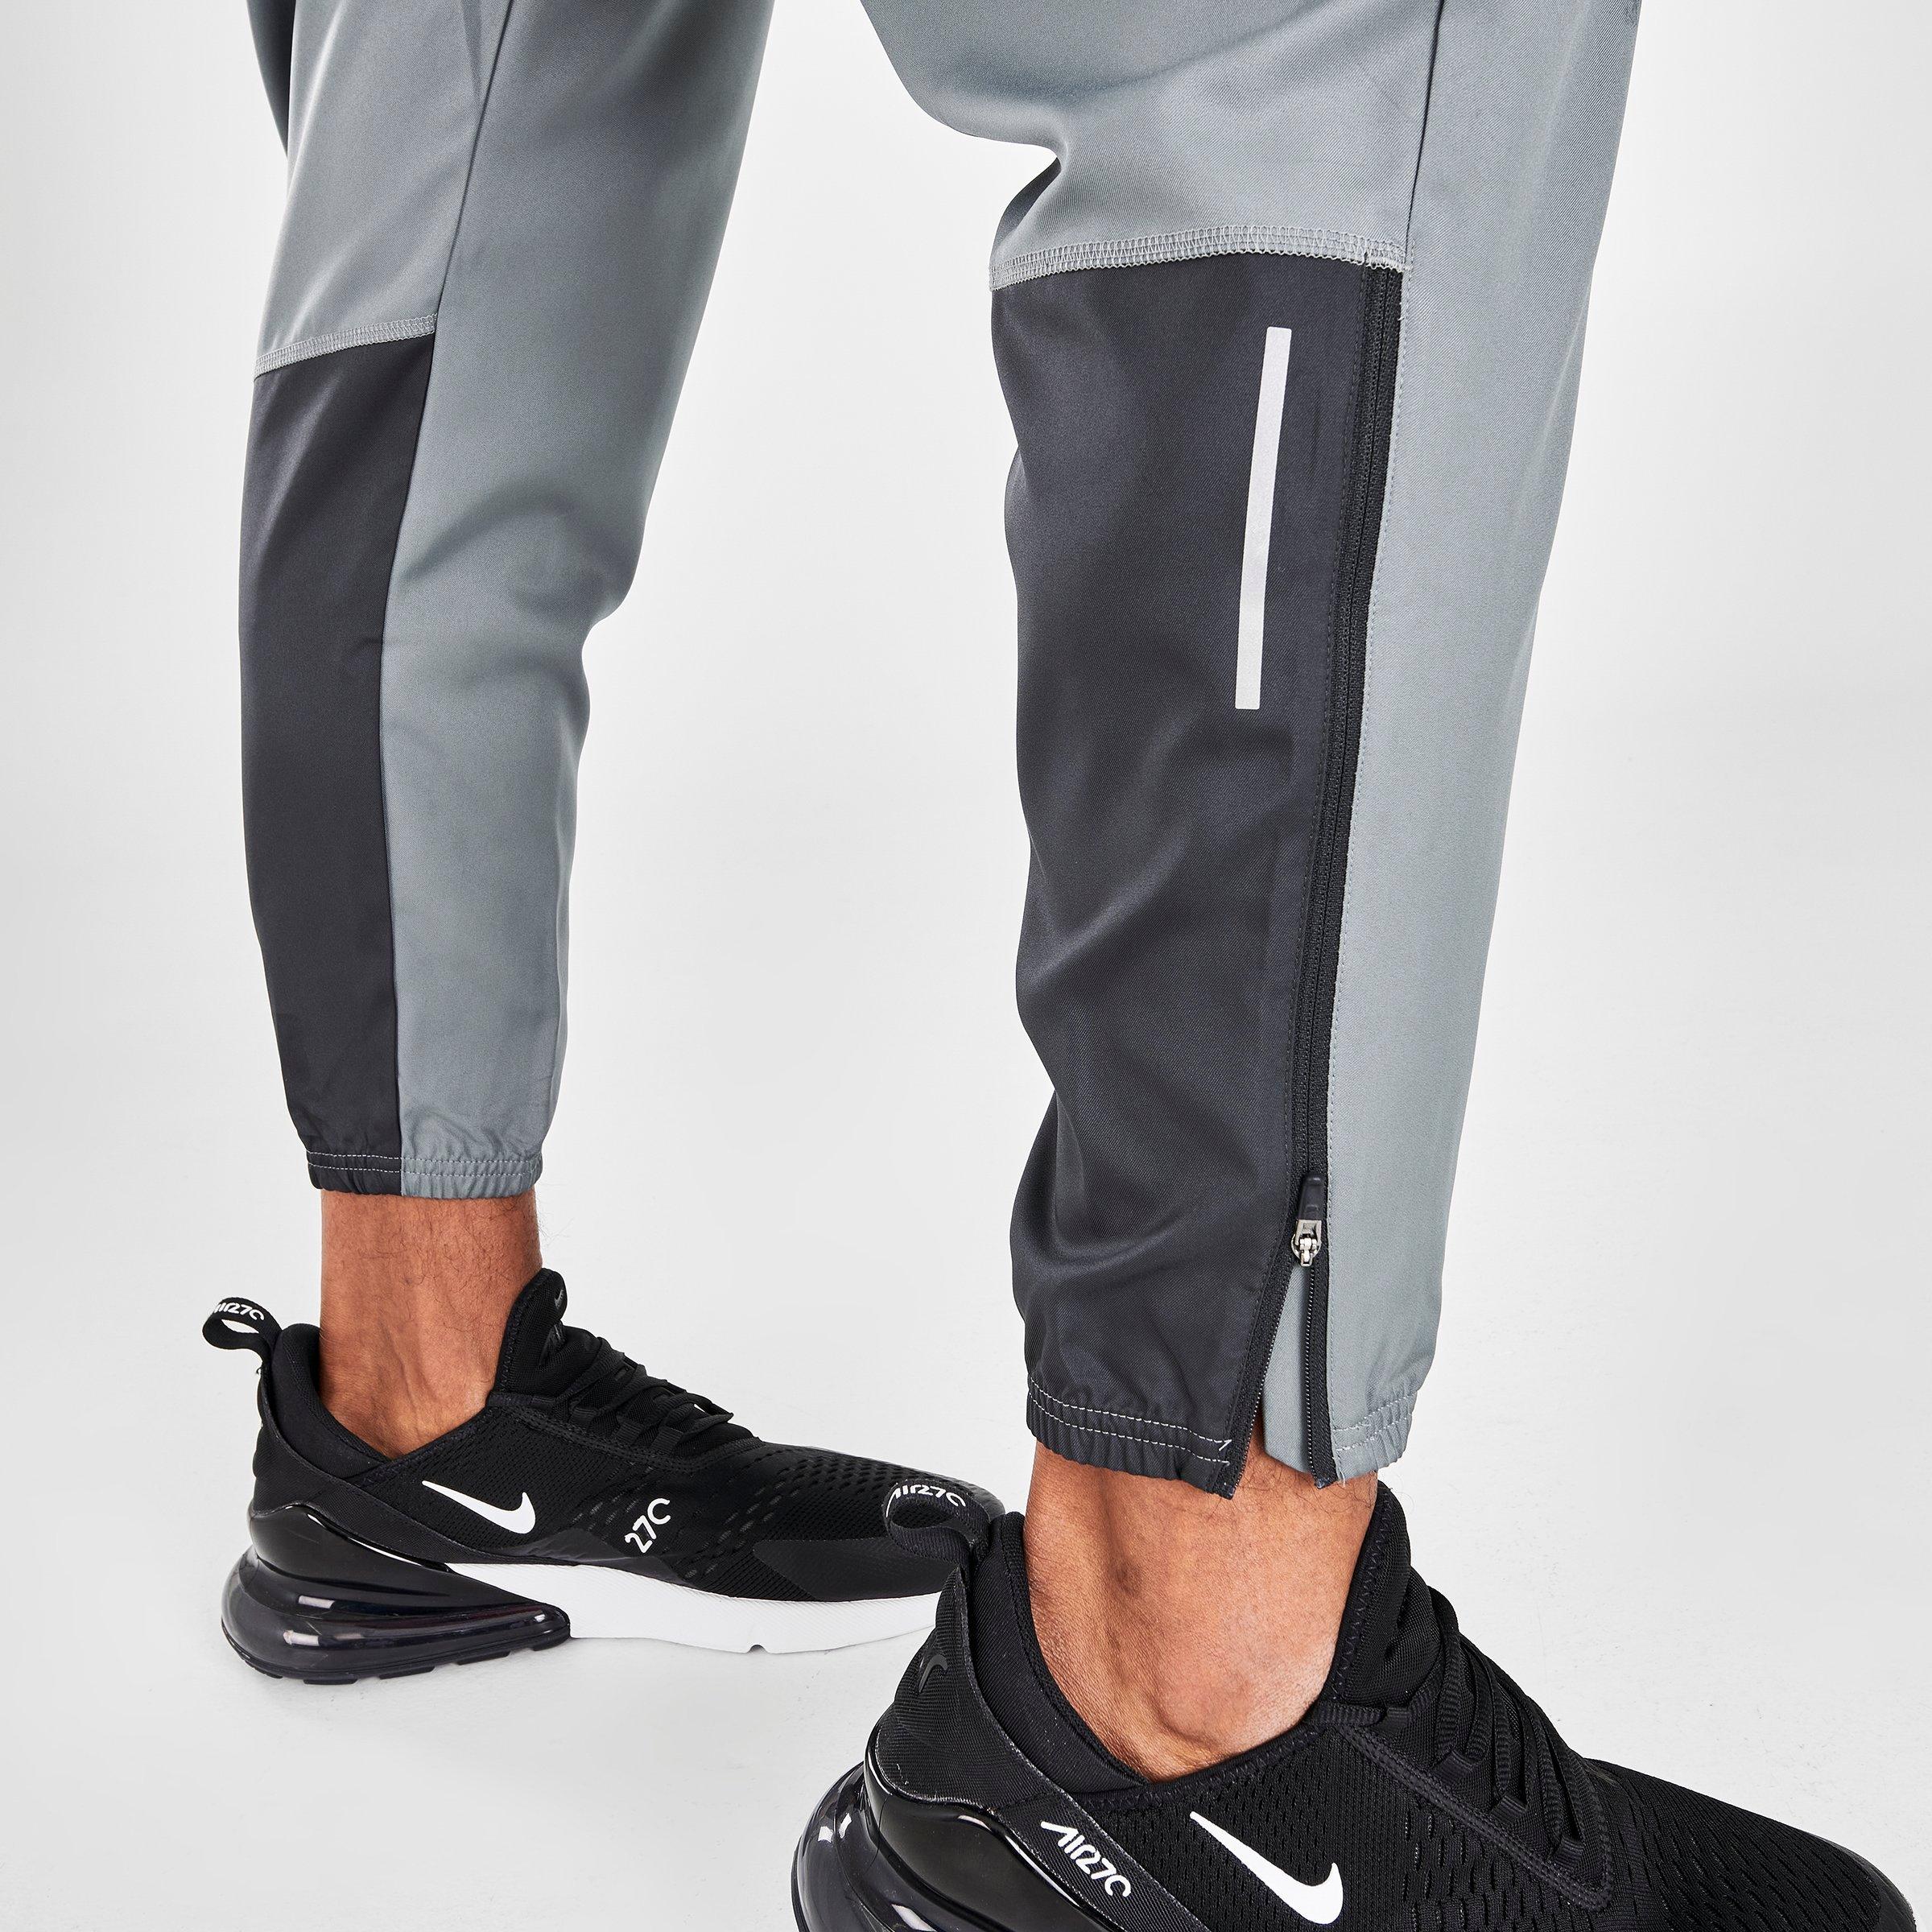 nike essential woven running pants